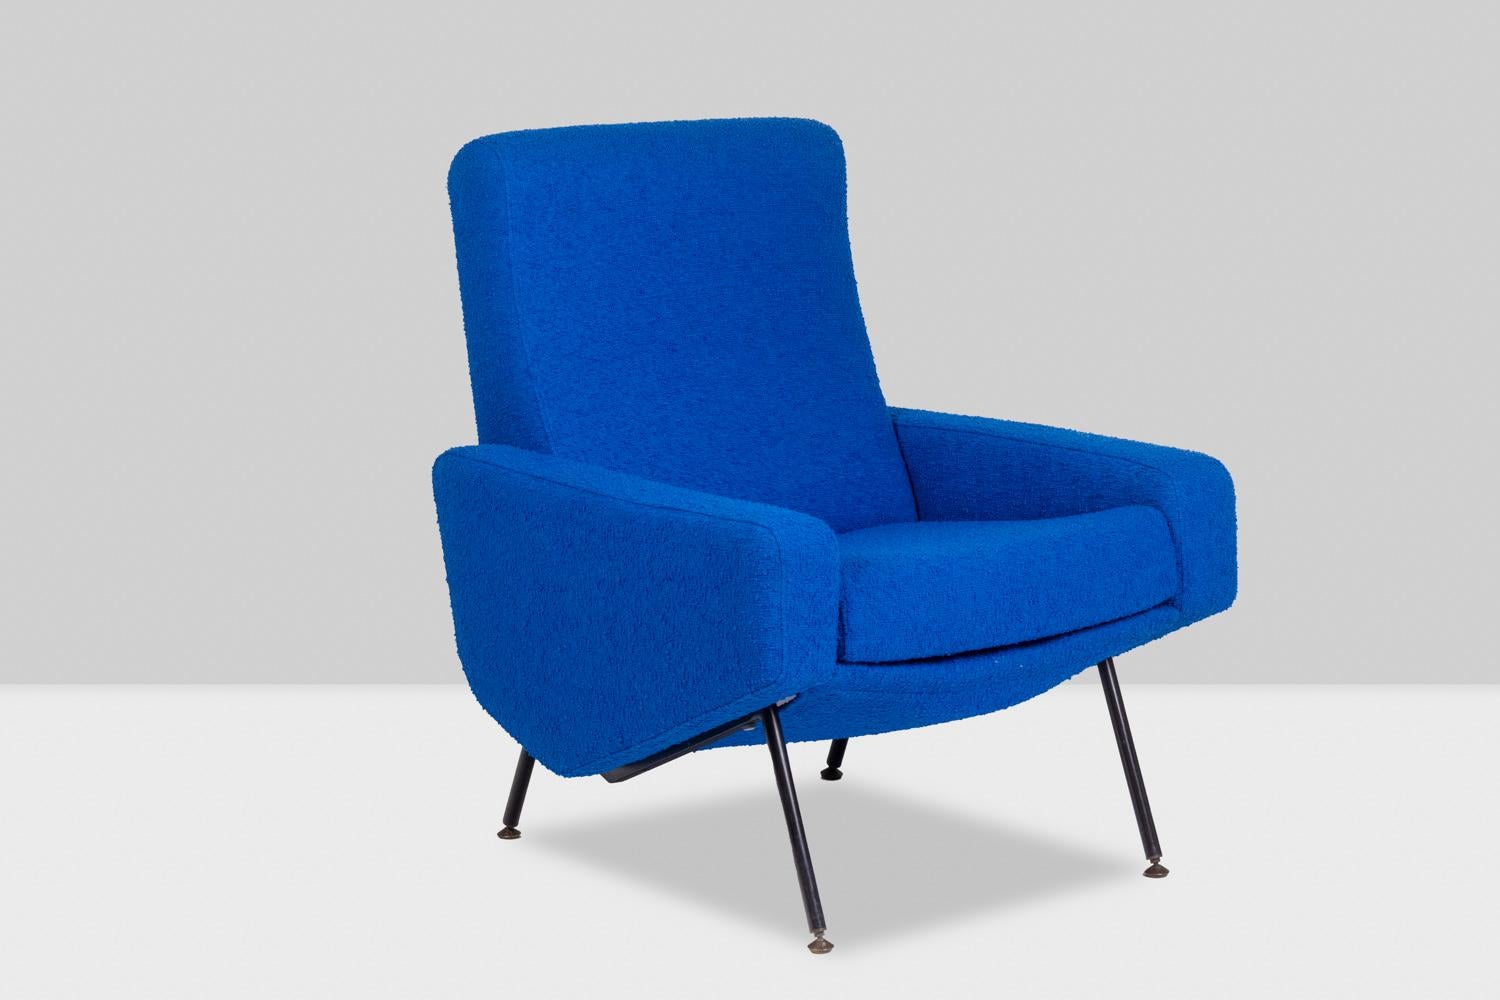 Pair of armchairs, “Troïka” model. Blue fabric and black lacquered metal base.

French work realized in the 1950s.
Pierre Guariche (1926-1995) is a French designer who studied at the National School of Decorative Arts from where he graduated in